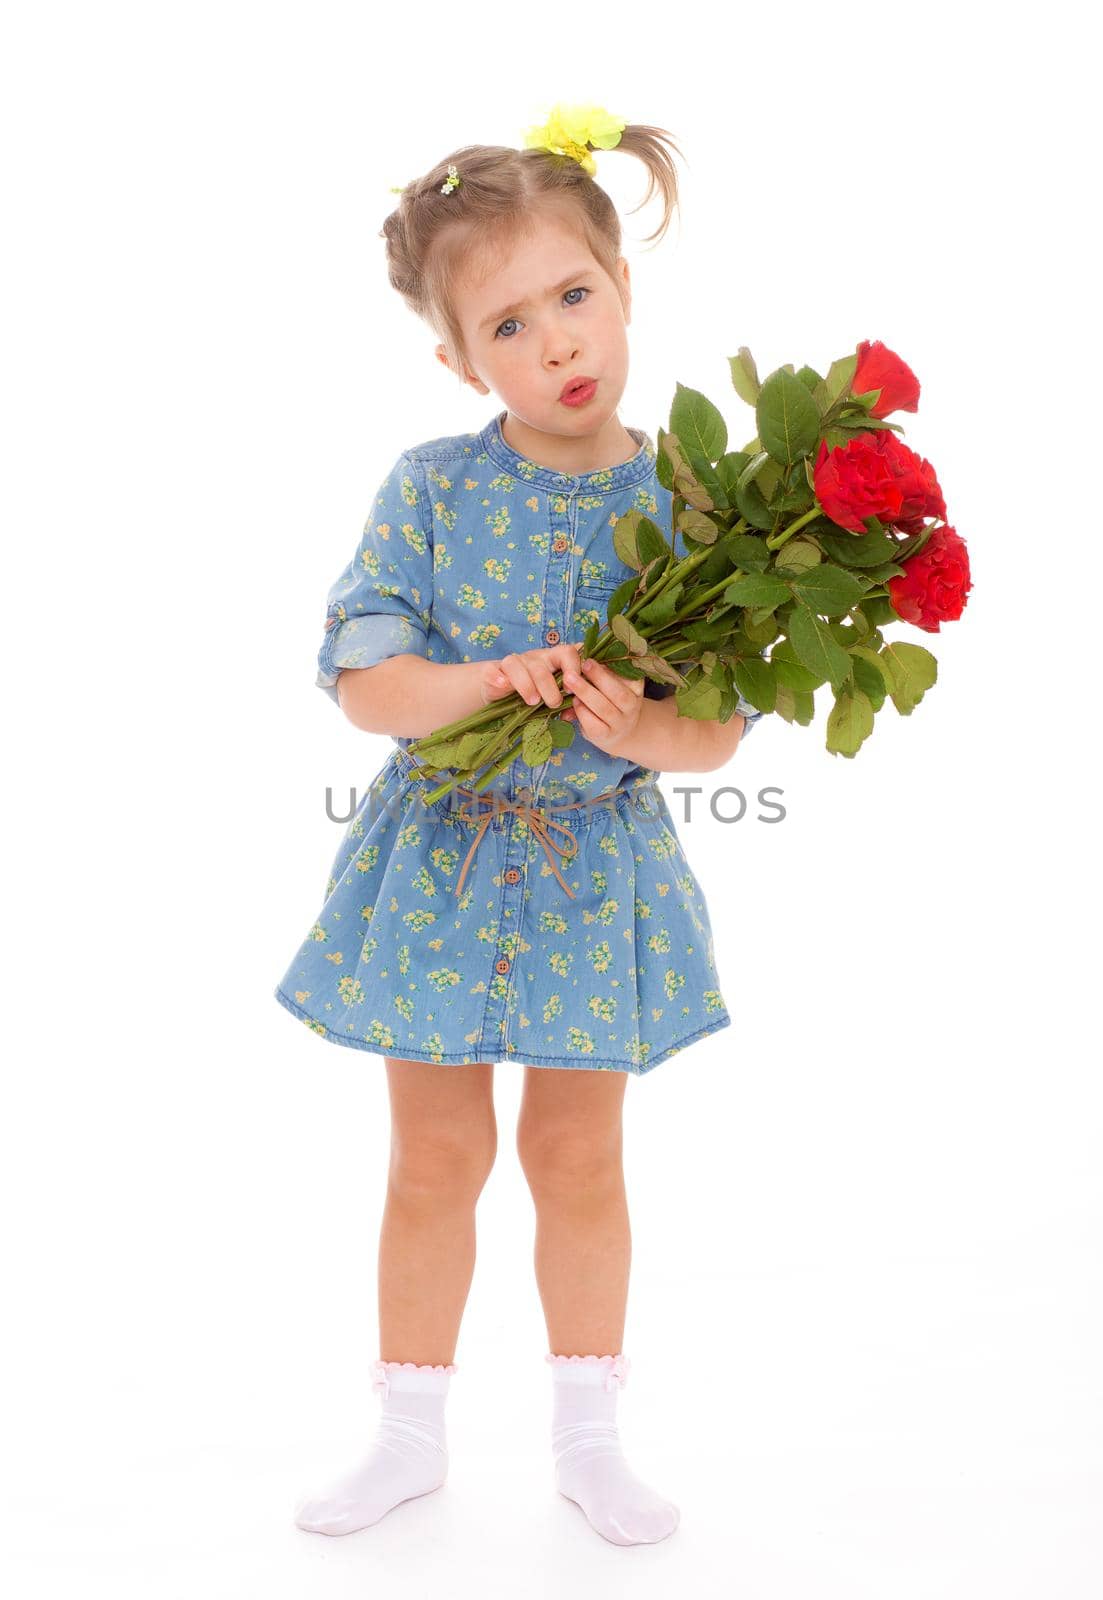 charming little girl holding a bouquet of red roses.Isolated on white.